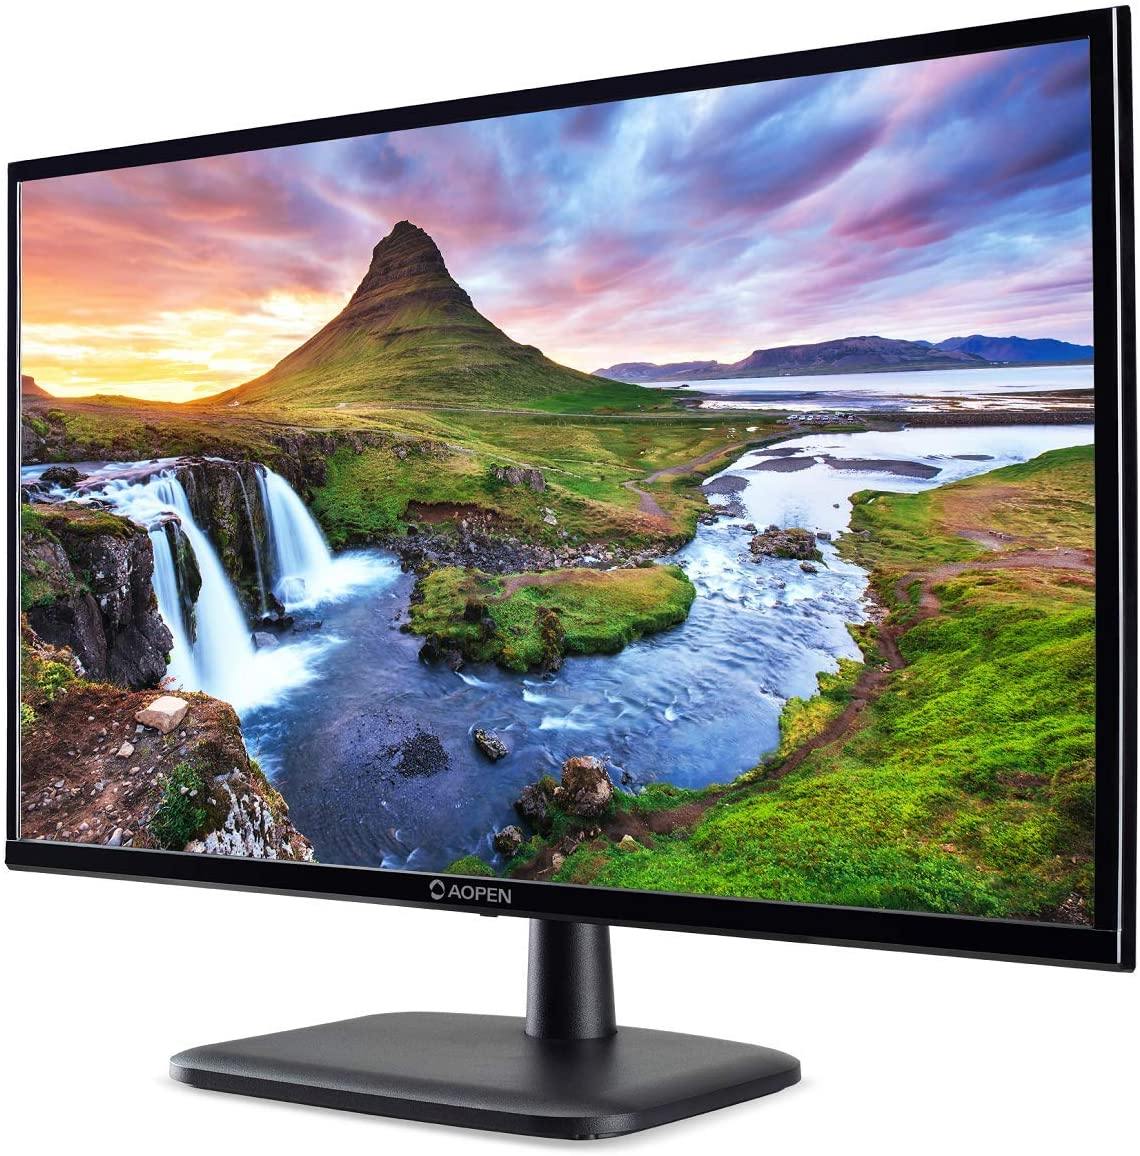 Acer Aopen 22" LED Monitor with 3 yrs manufacturer warranty#22CV1Q-BIack.(New) - Atlas Computers & Electronics 